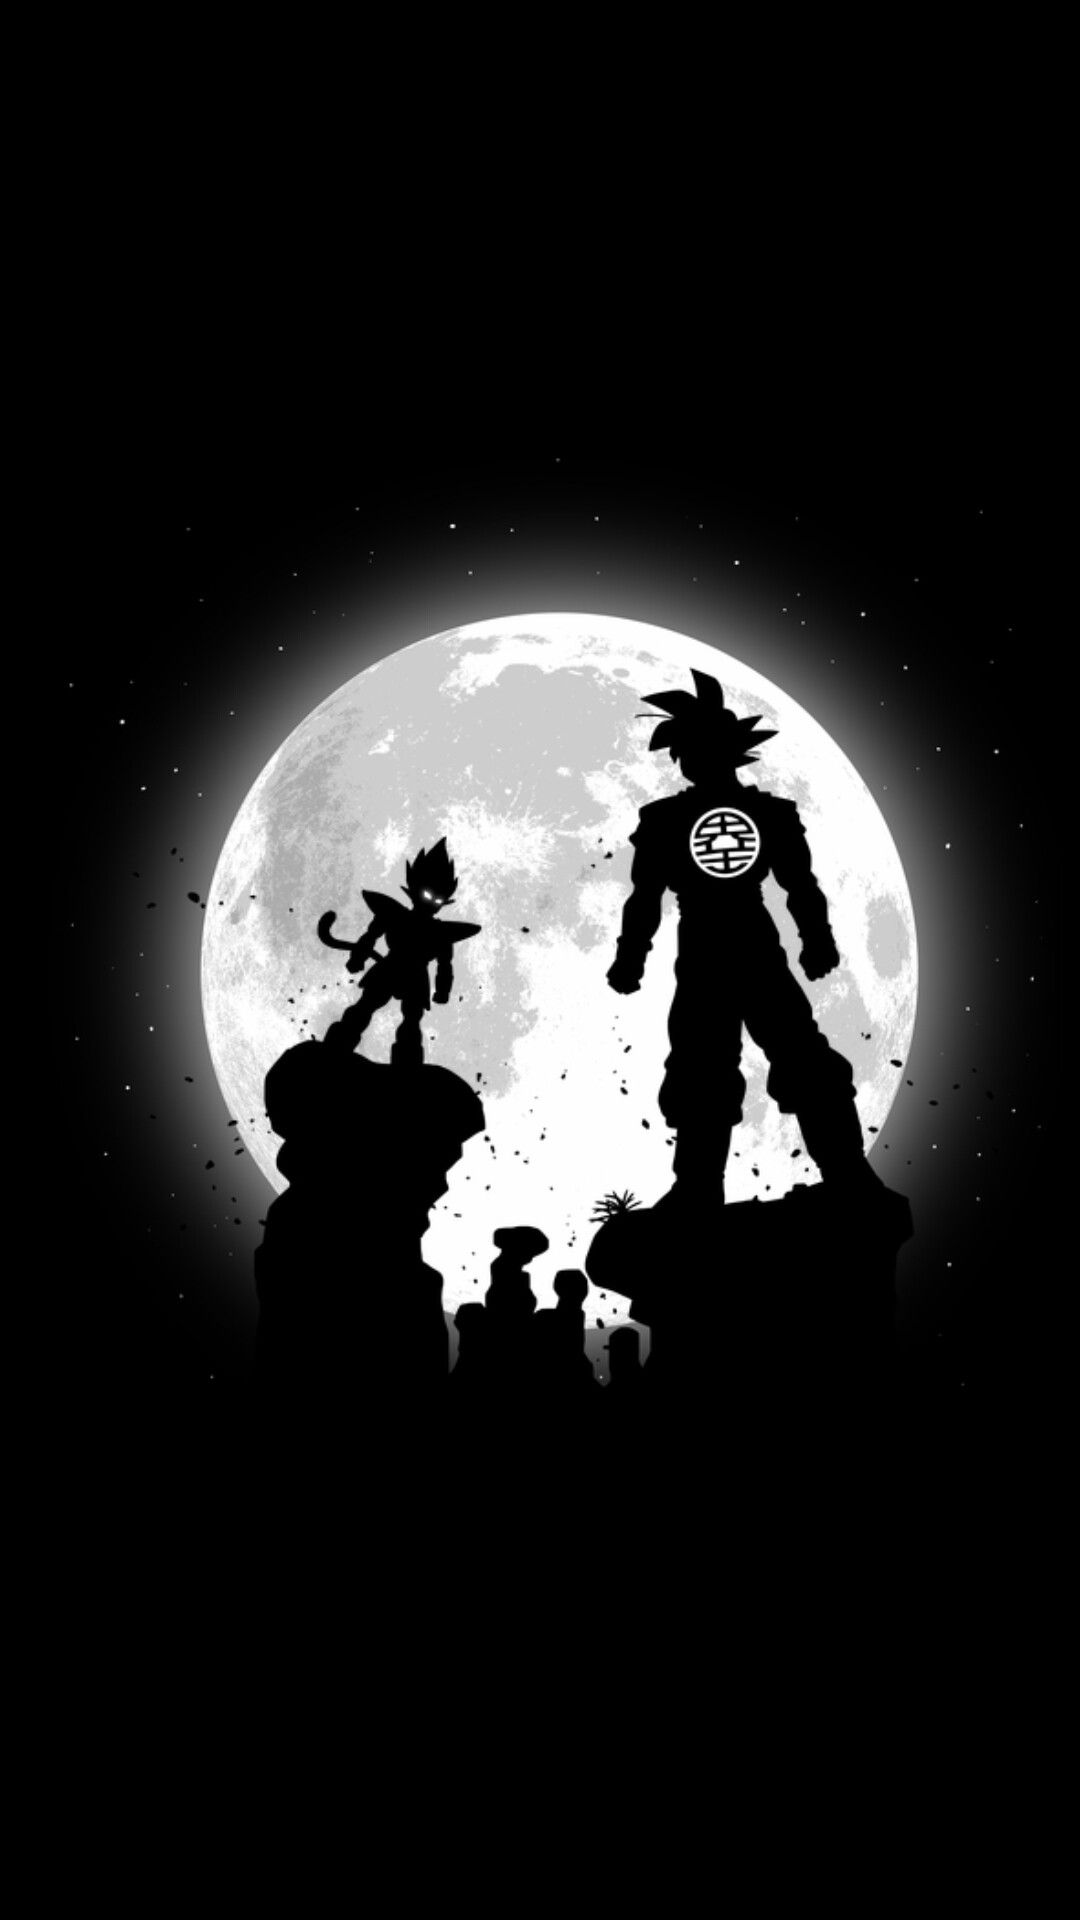 19+ Dragon Ball Z Black And White Wallpapers on ...